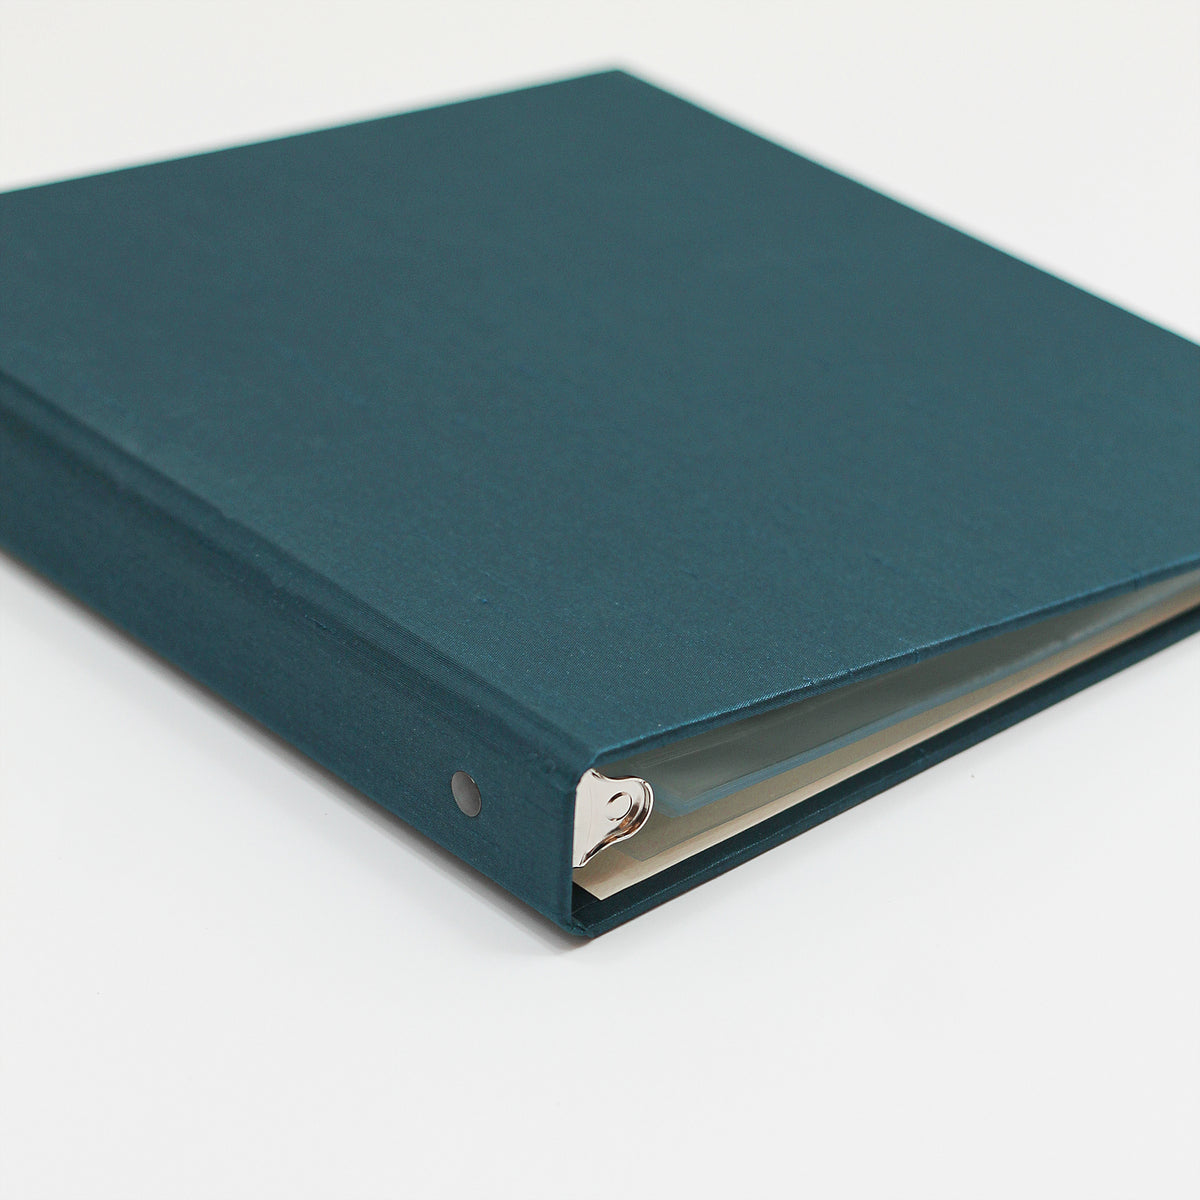 Large Photo Binder (for 5x7 photos) with Teal Blue Silk Cover